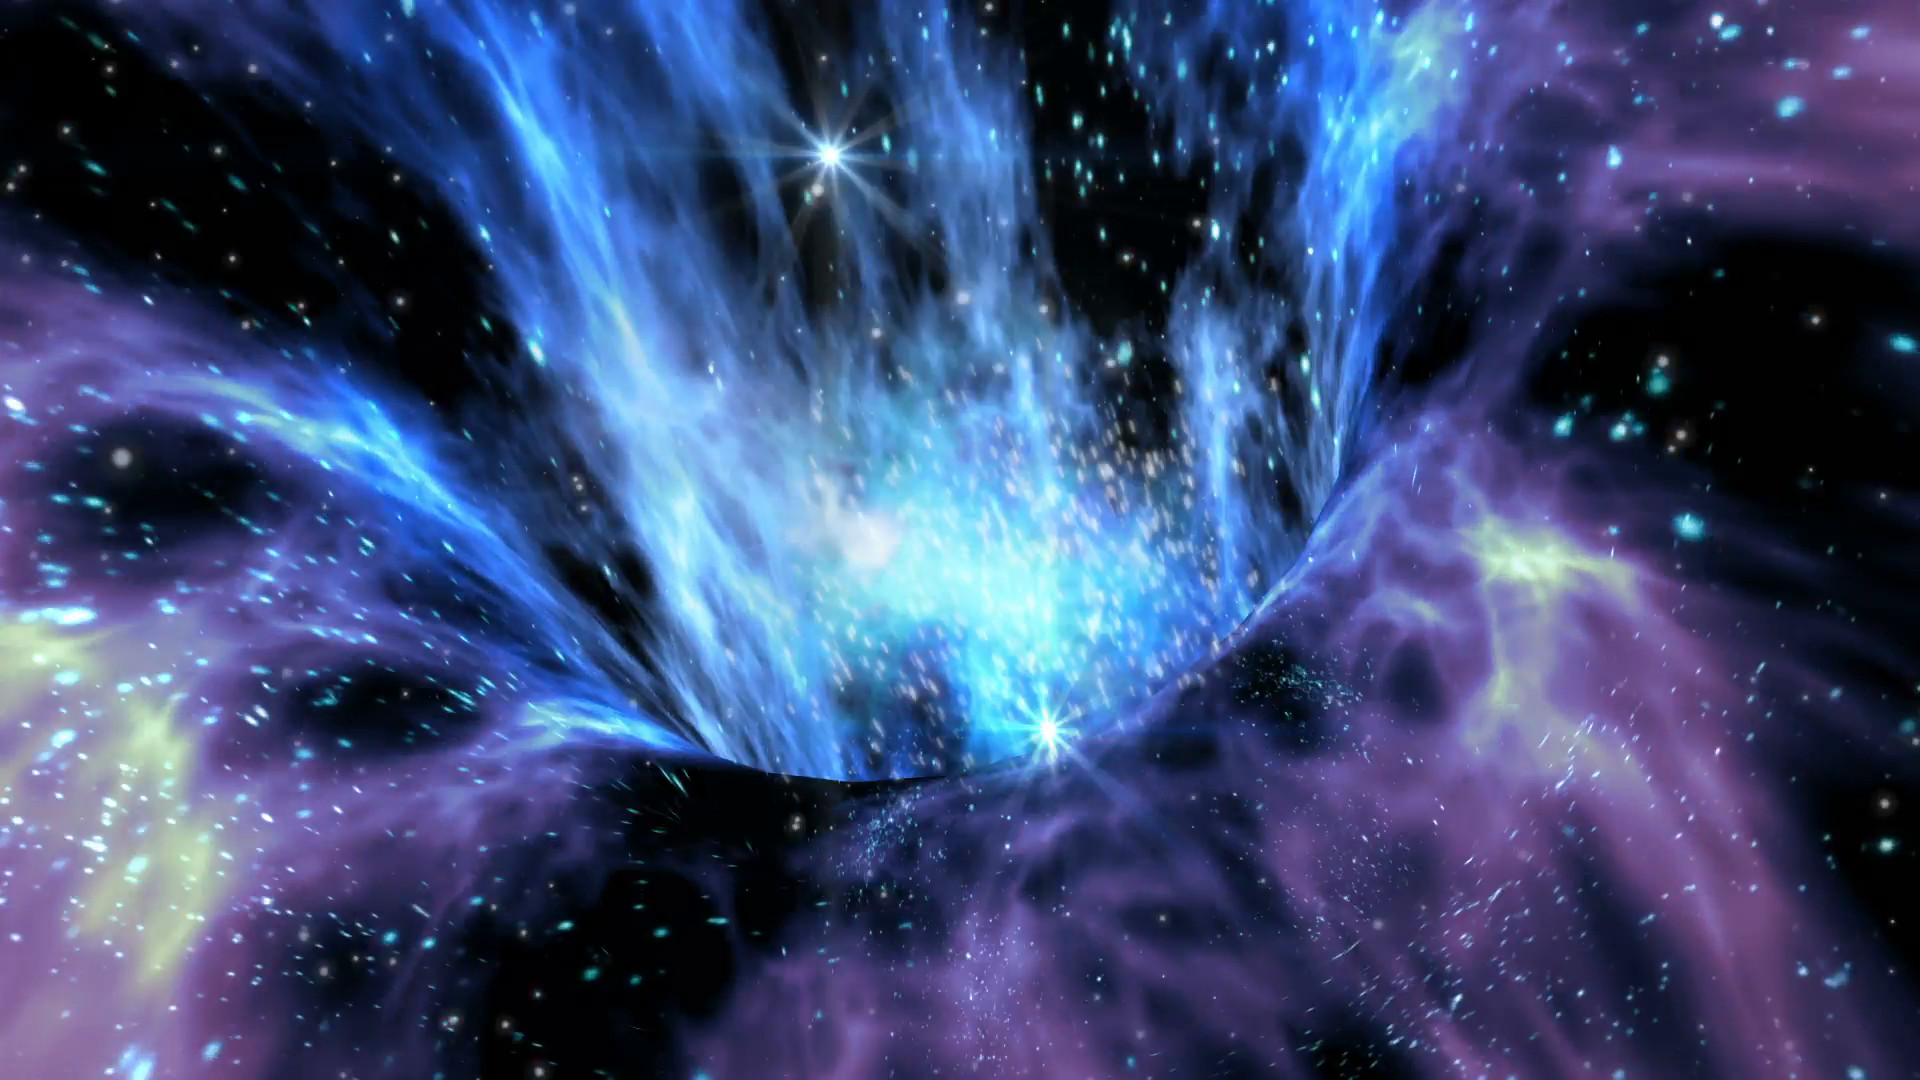 1920x1080 Loop animation with wormhole interstellar travel through a blue force field  with galaxies and stars, for a space-time continuum background Motion  Background ...